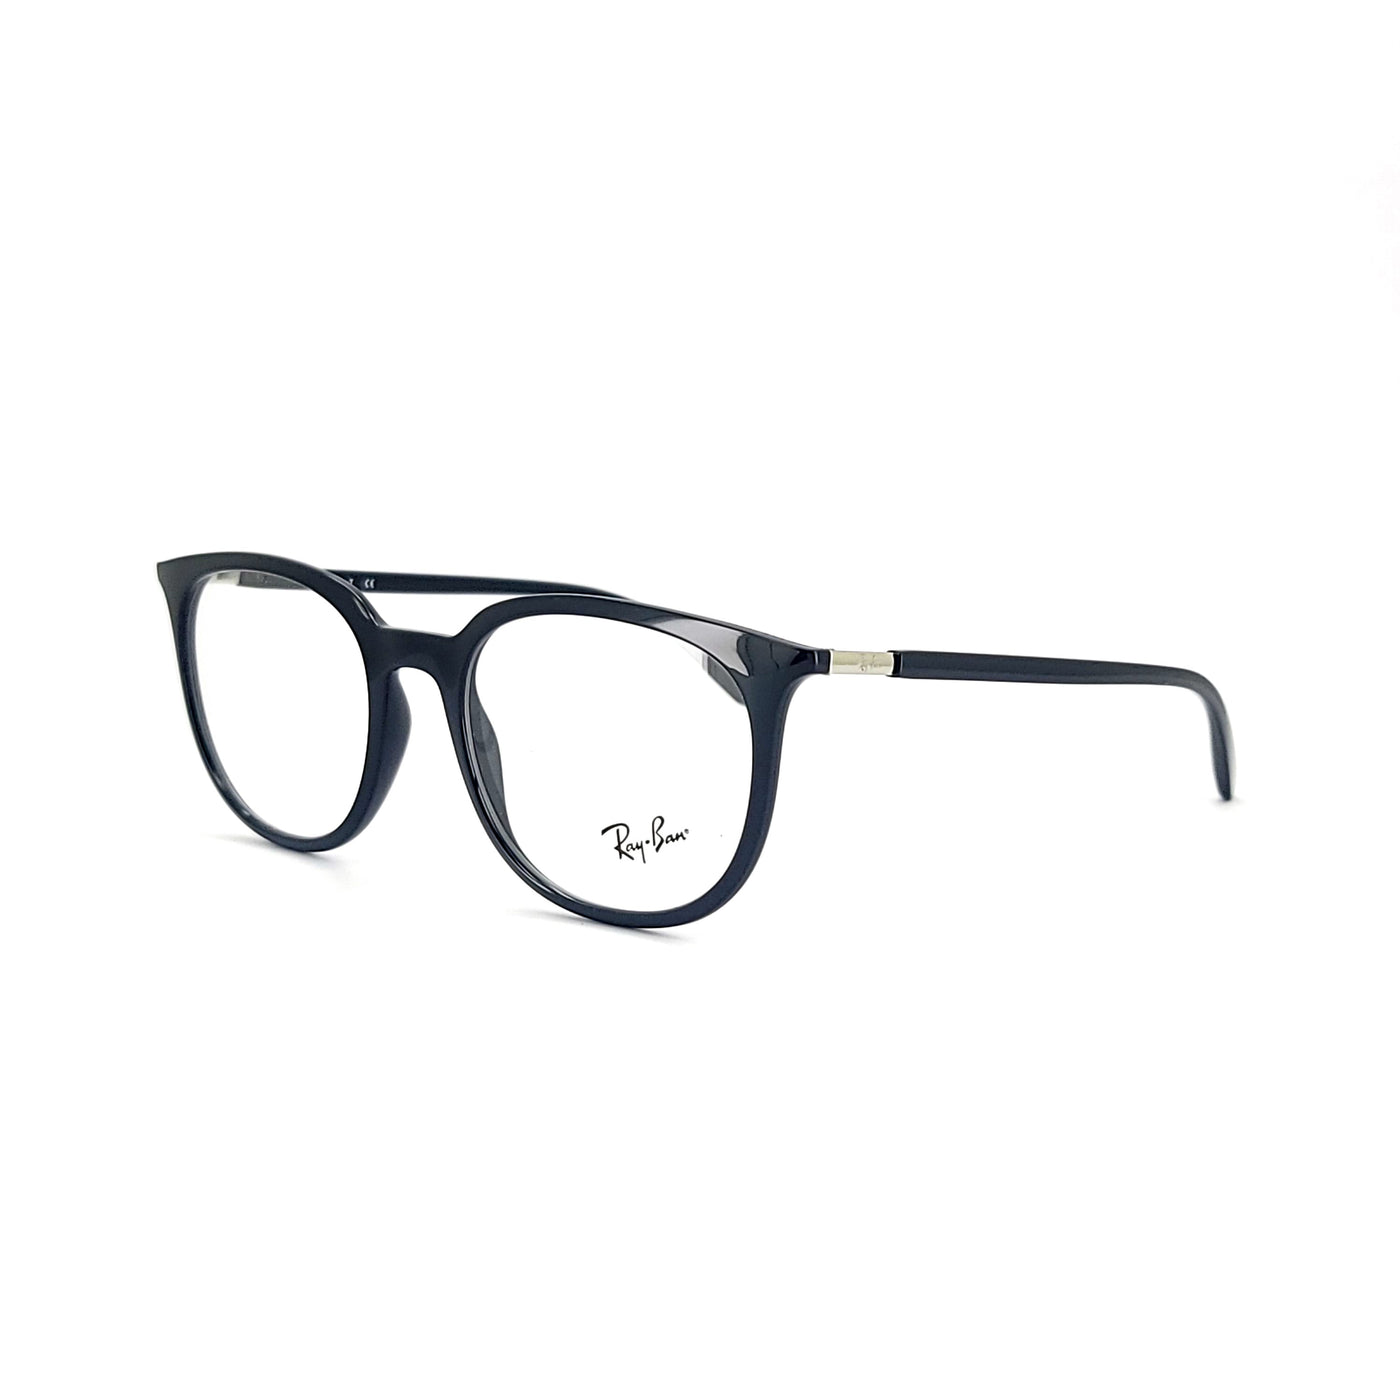 Ray-Ban Highstreet RB7190/2000_53 | Eyeglasses - Vision Express Optical Philippines